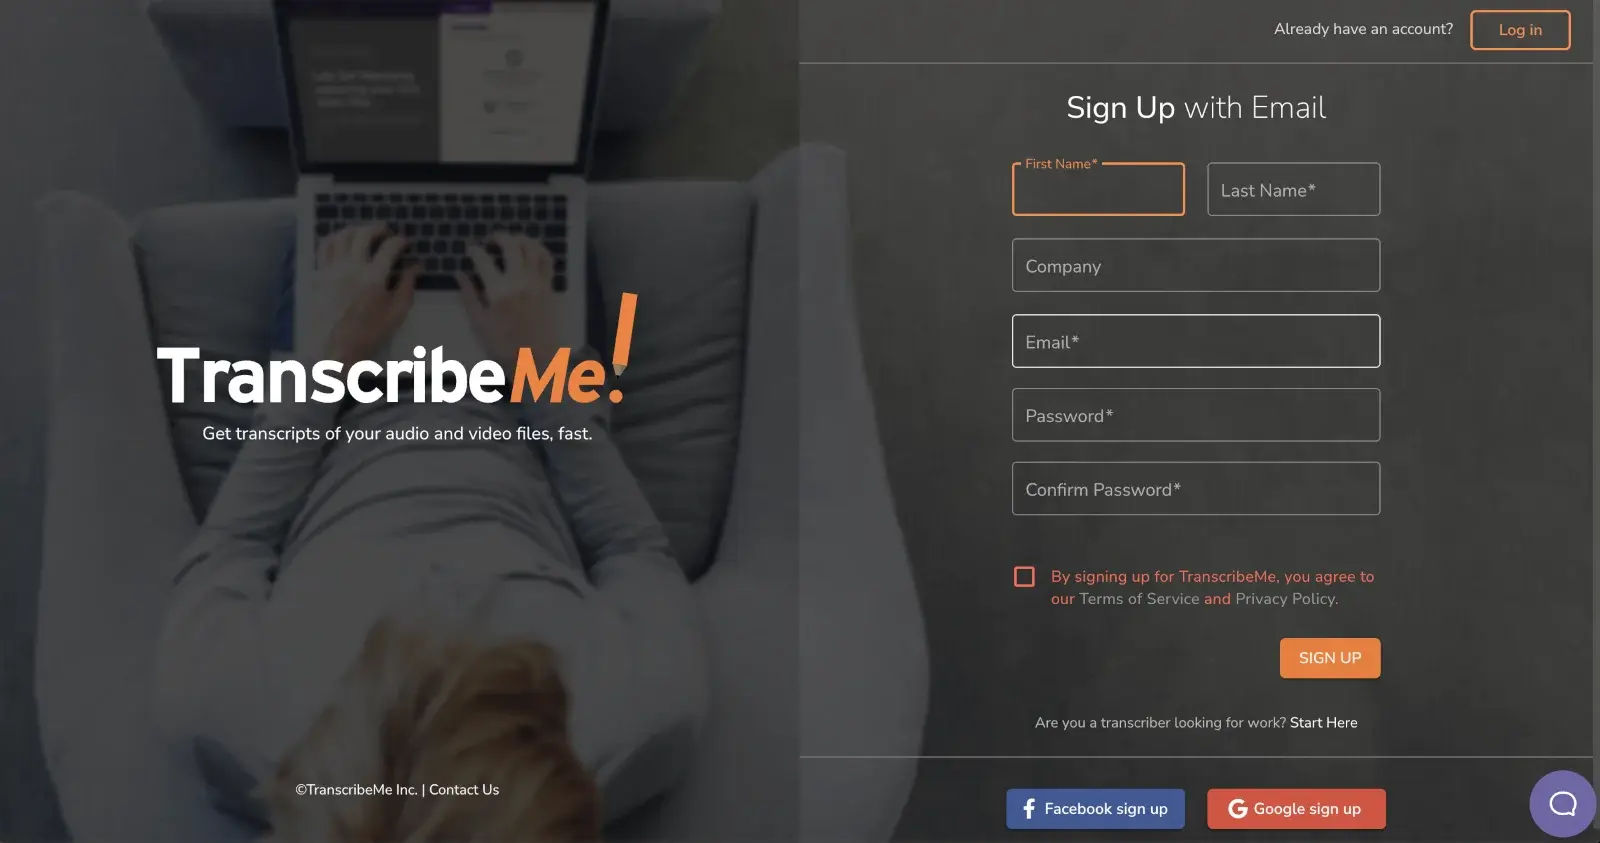 How to Get Started with TranscribeMe